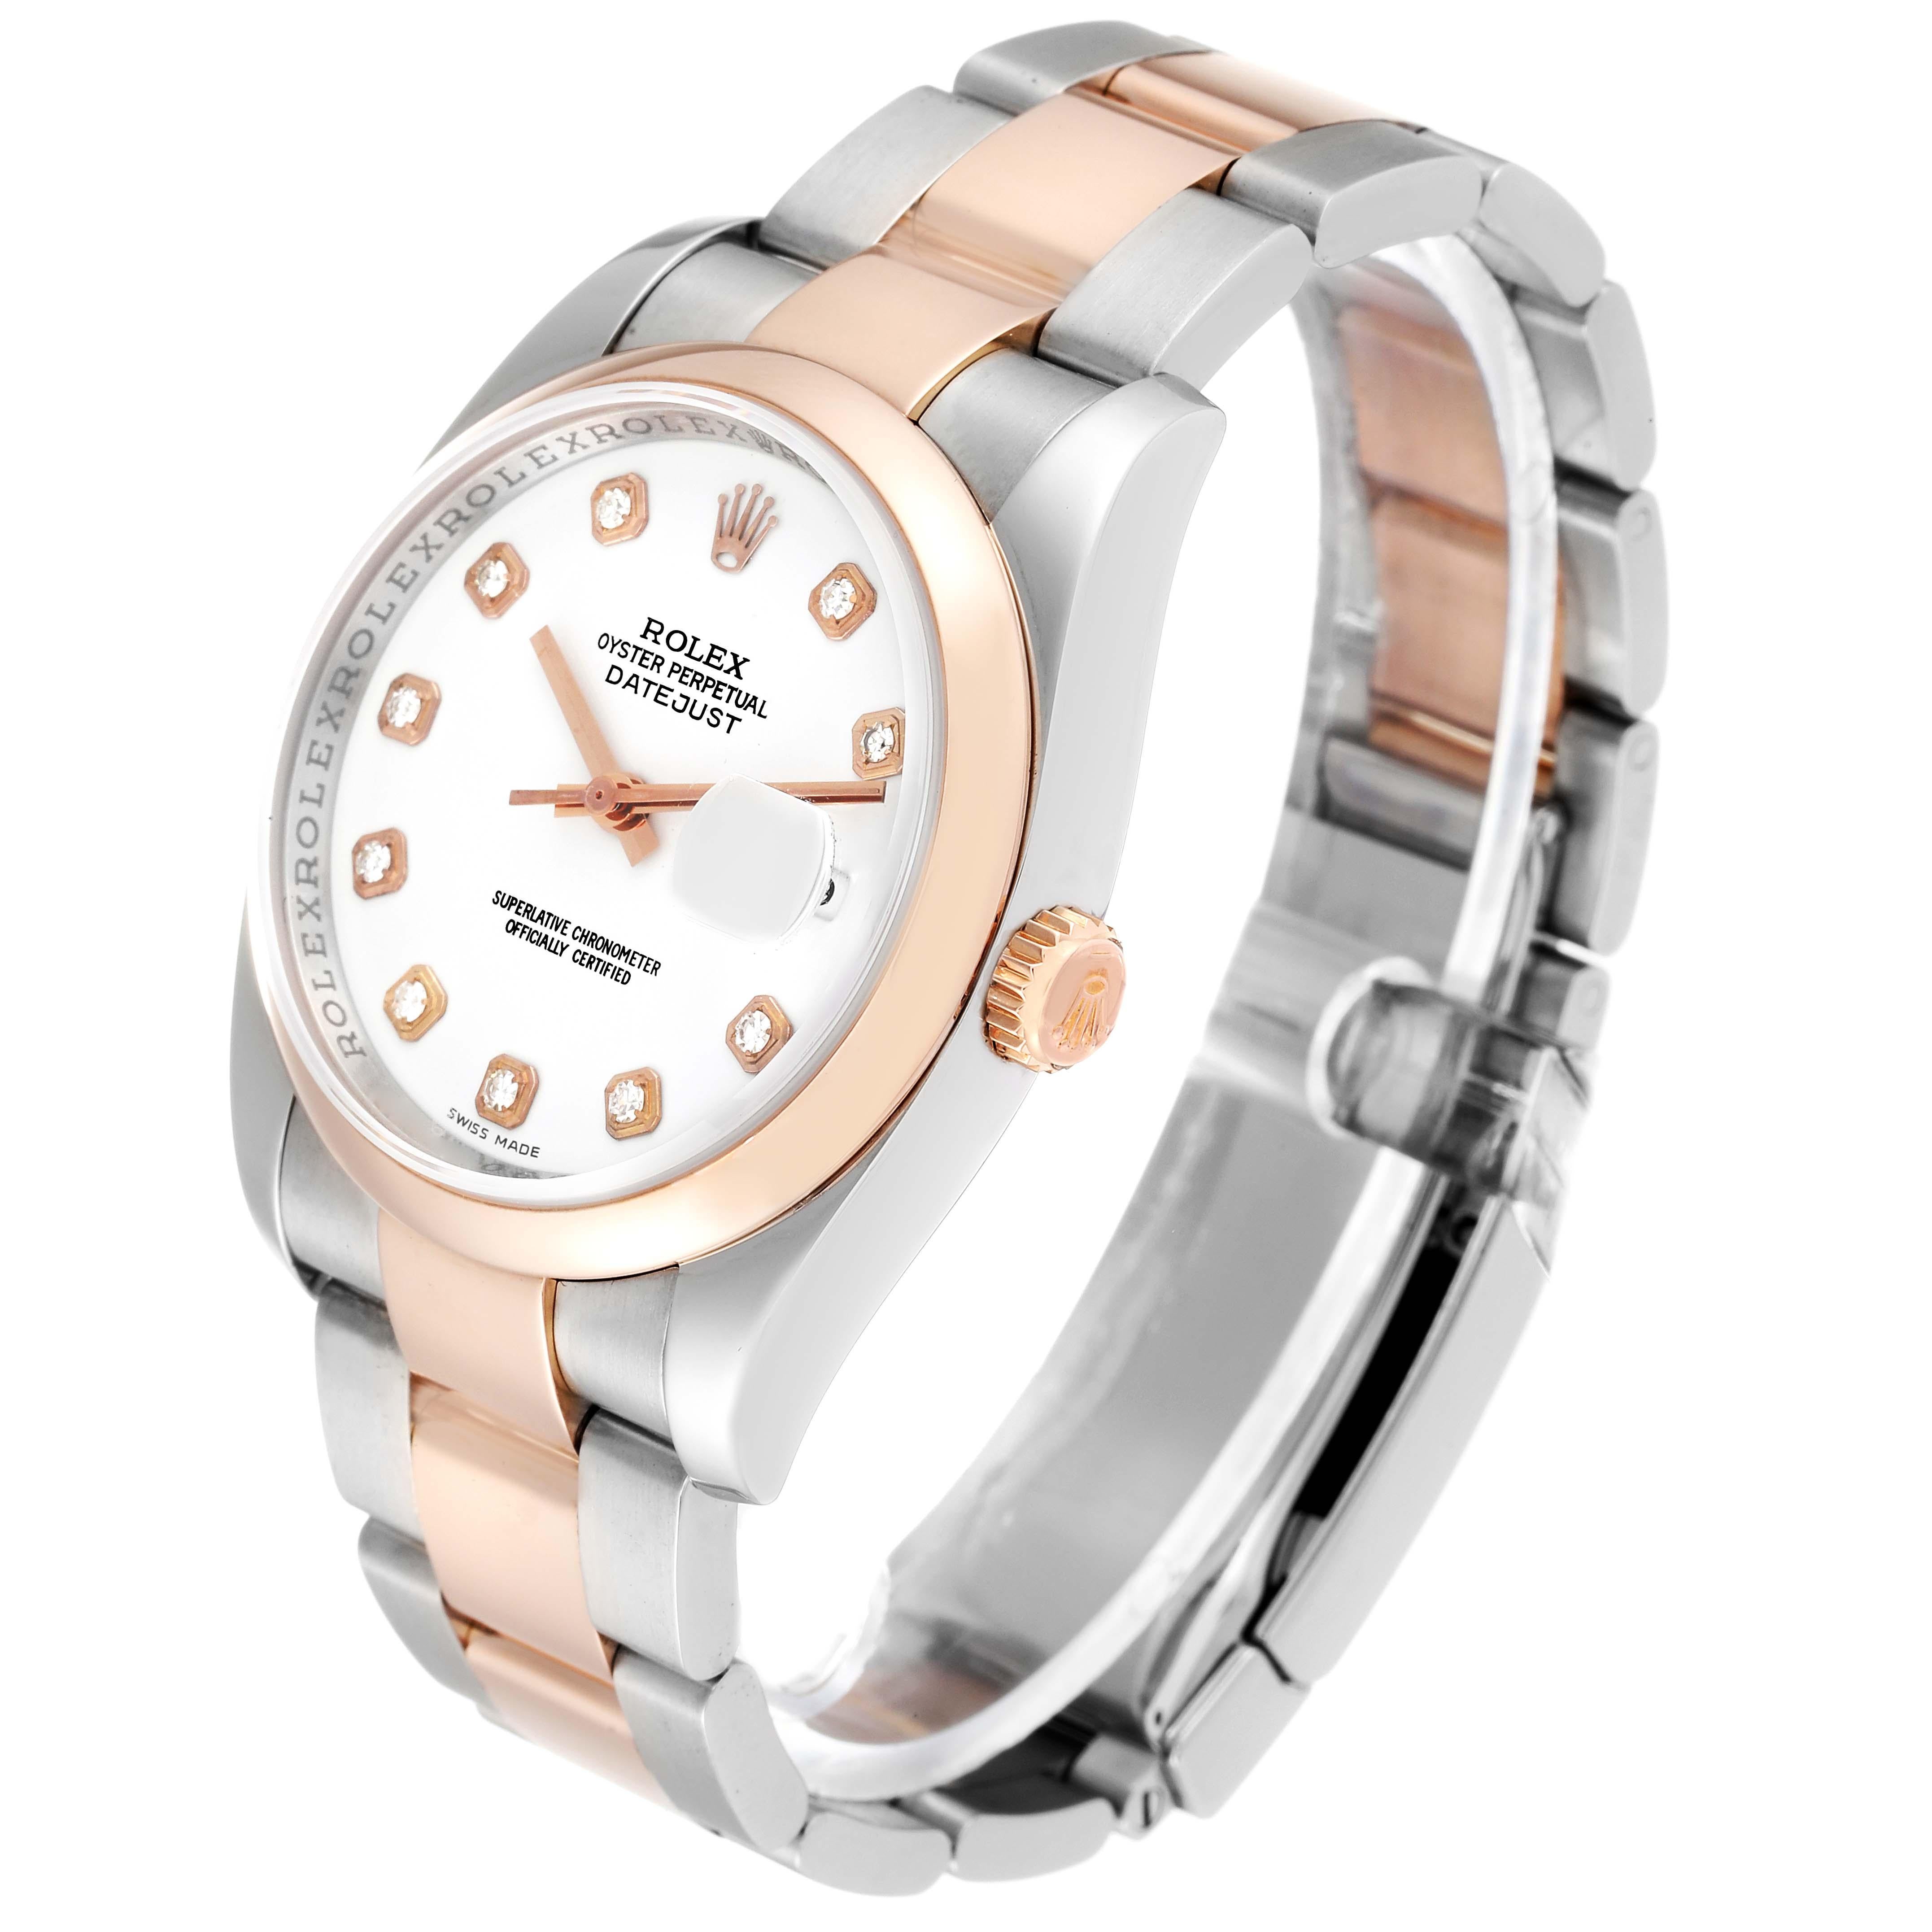 Men's Rolex Datejust Steel Rose Gold White Diamond Dial Mens Watch 116201 Box Papers For Sale